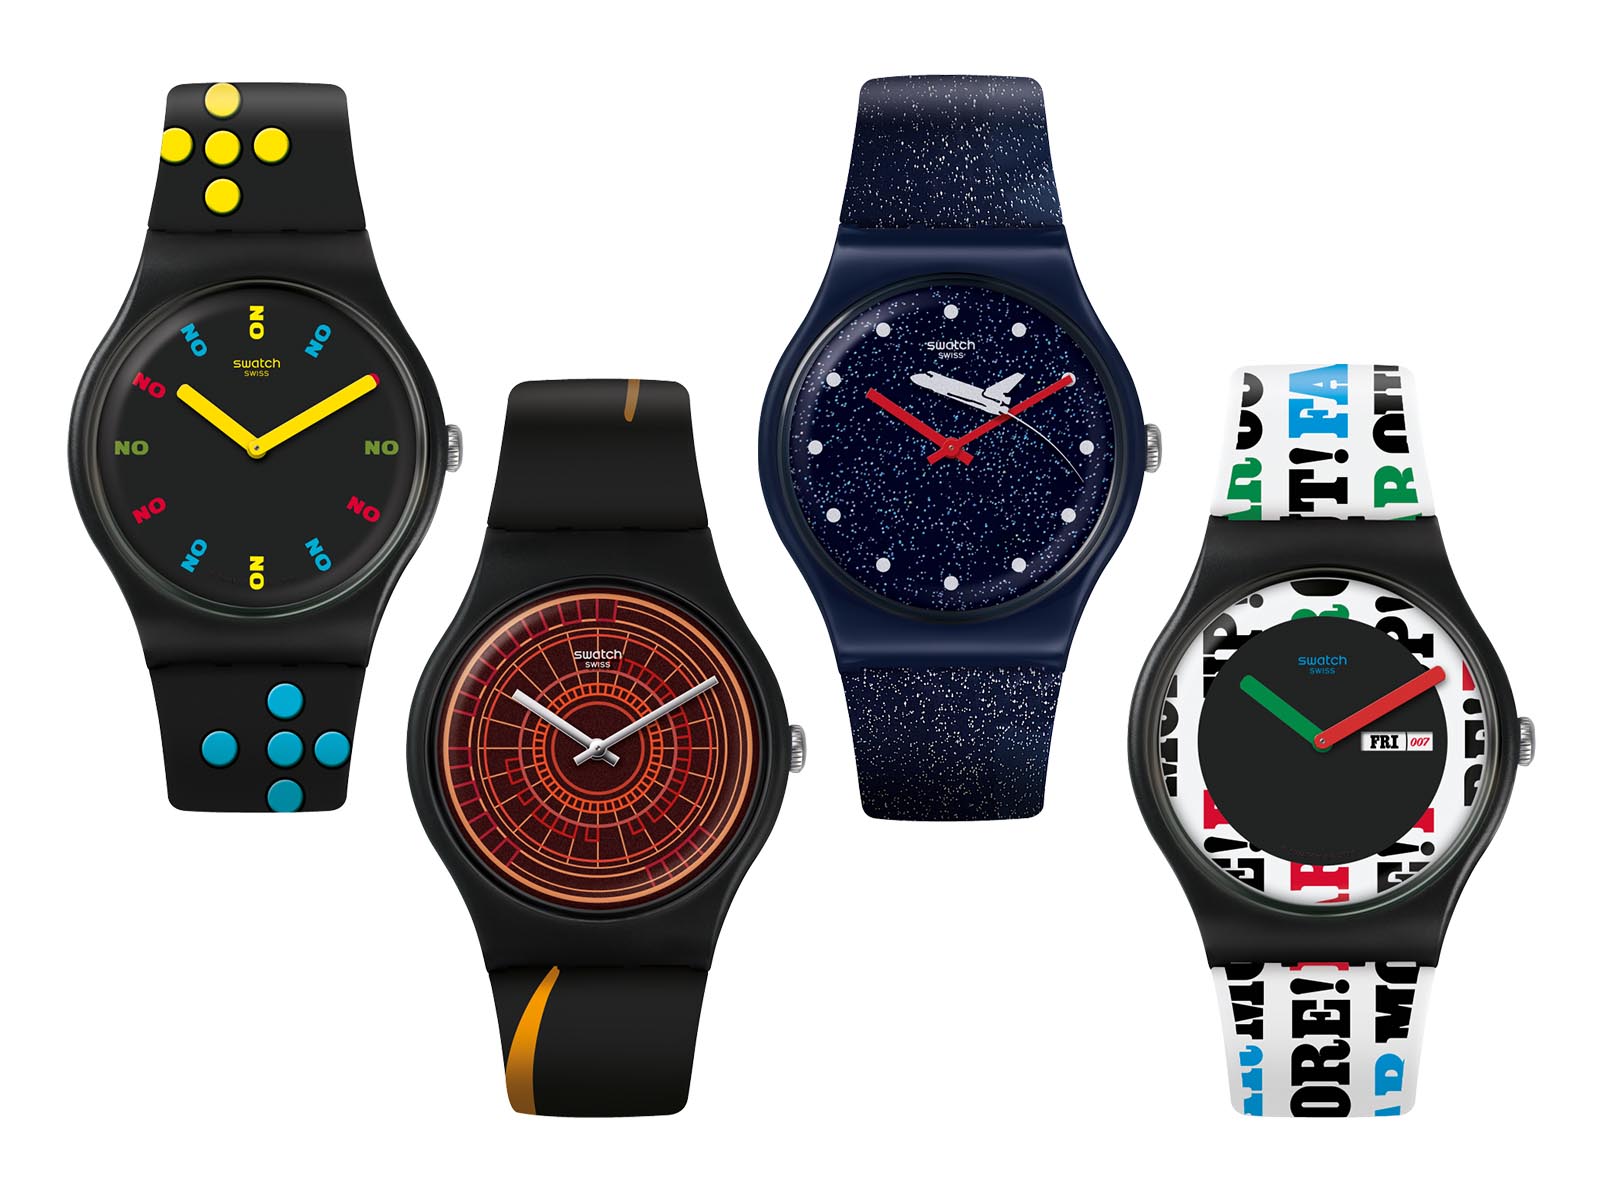 Swatch X 007 Collection